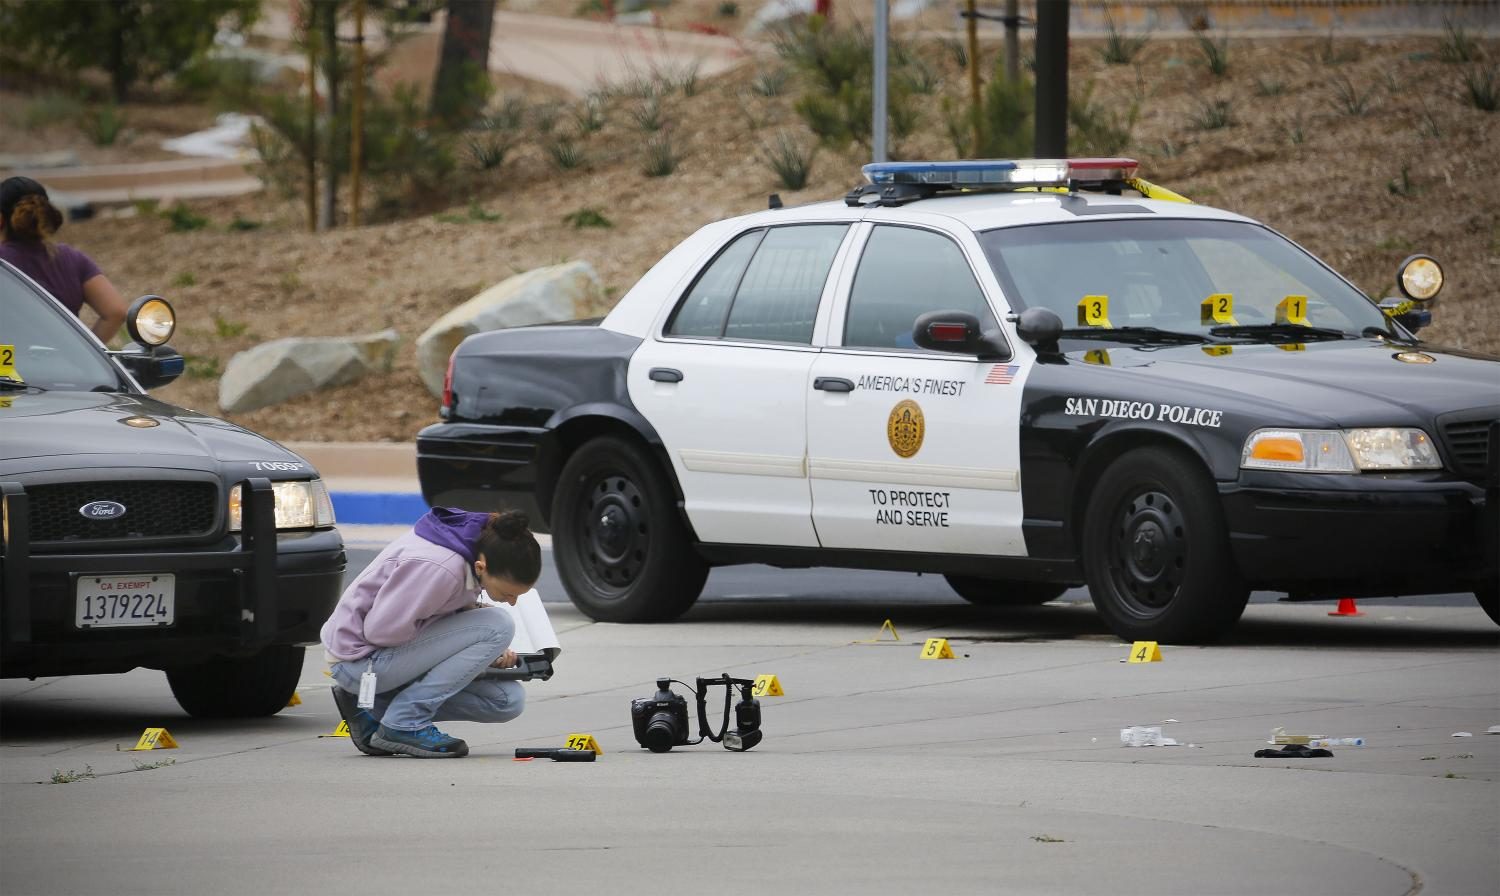 A member of the San Diego Police Department examines what appears to be a gun on the ground at the scene of a fatal police officer involved shooting of a 15-year-old boy in one of the parking lots in front of Torrey Pines High School, early Saturday morning, May 6, 2017, in San Diego, Calif. Police believe the boy called police, and when they arrived pointed a gun at them and didnt follow their commands to drop it. It turns out that the gun is a semi-automatic BB air pistol. (Howard Lipin/San Diego Union-Tribune/TNS)